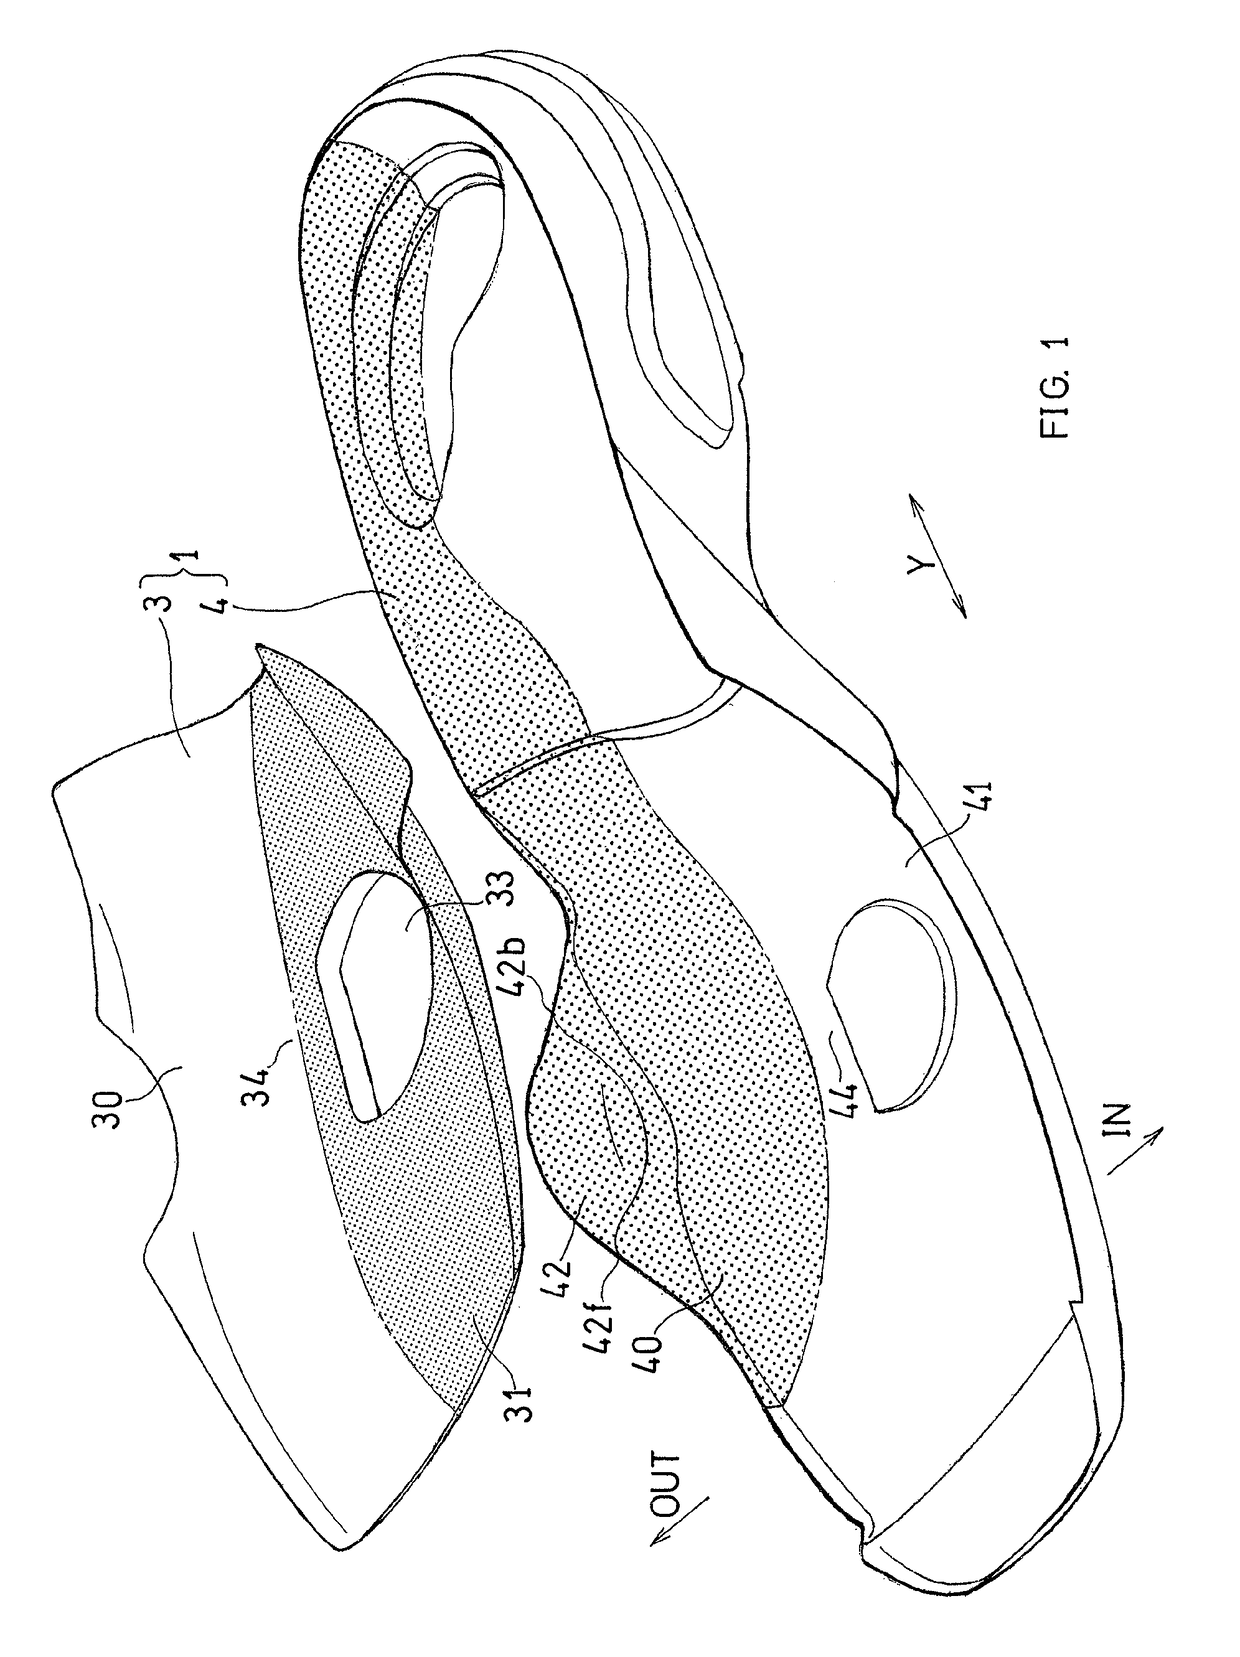 Shoe sole having outsole and midsole